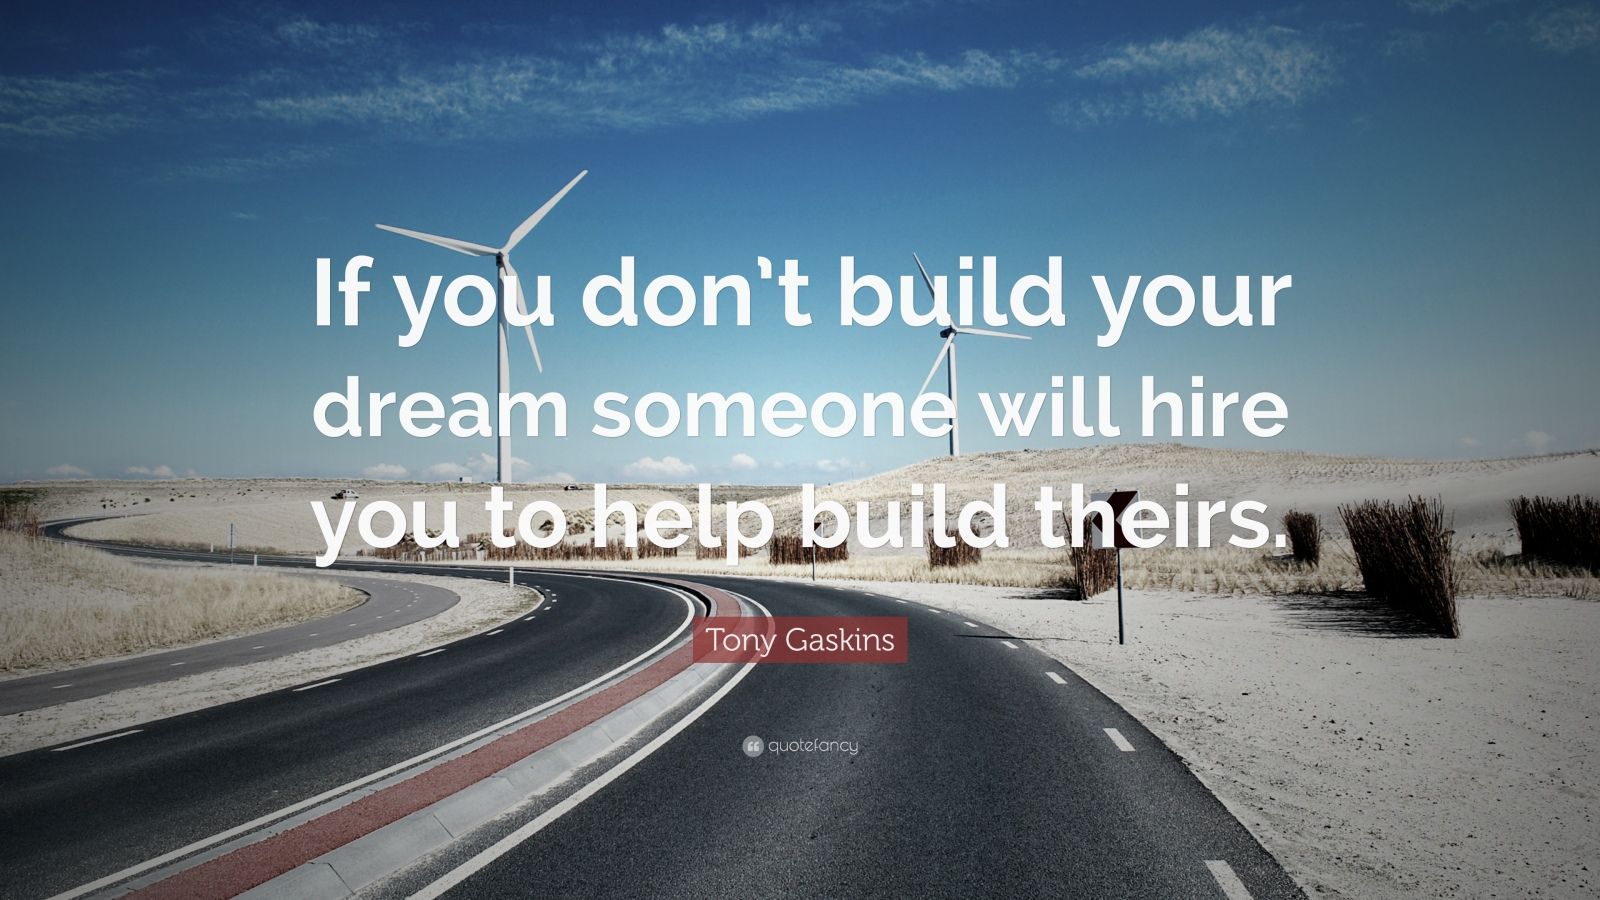 Tony Gaskins Quote: "If you don't build your dream someone ...